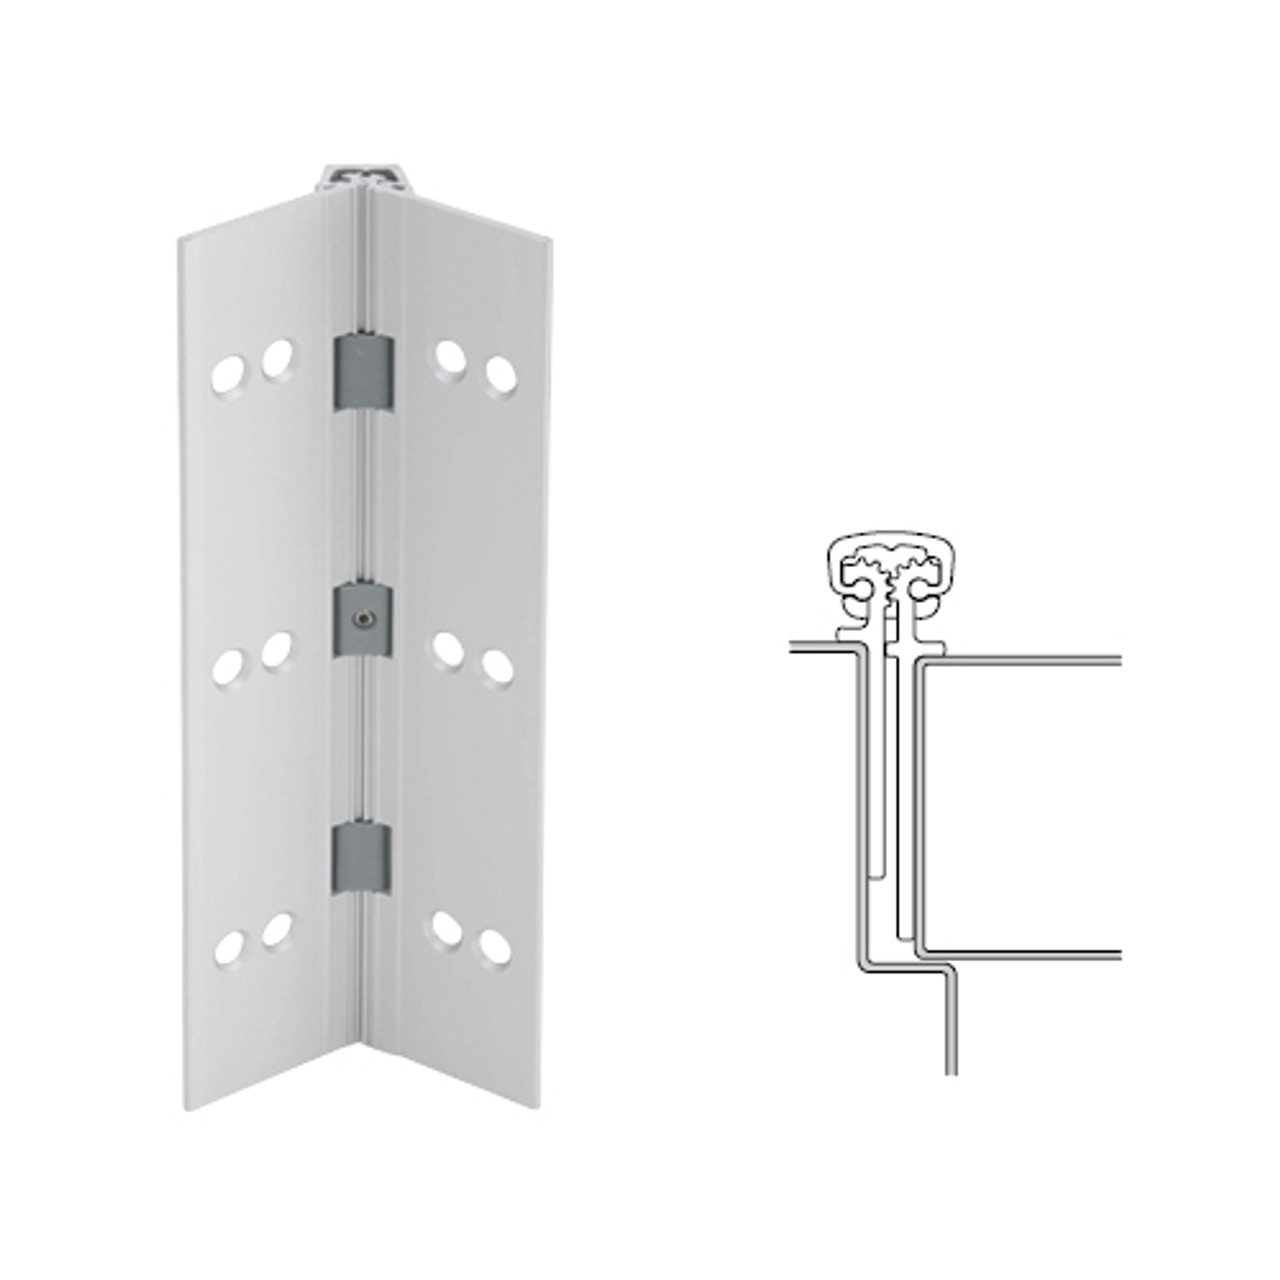 026XY-US28-120-WD IVES Full Mortise Continuous Geared Hinges with Wood Screws in Satin Aluminum